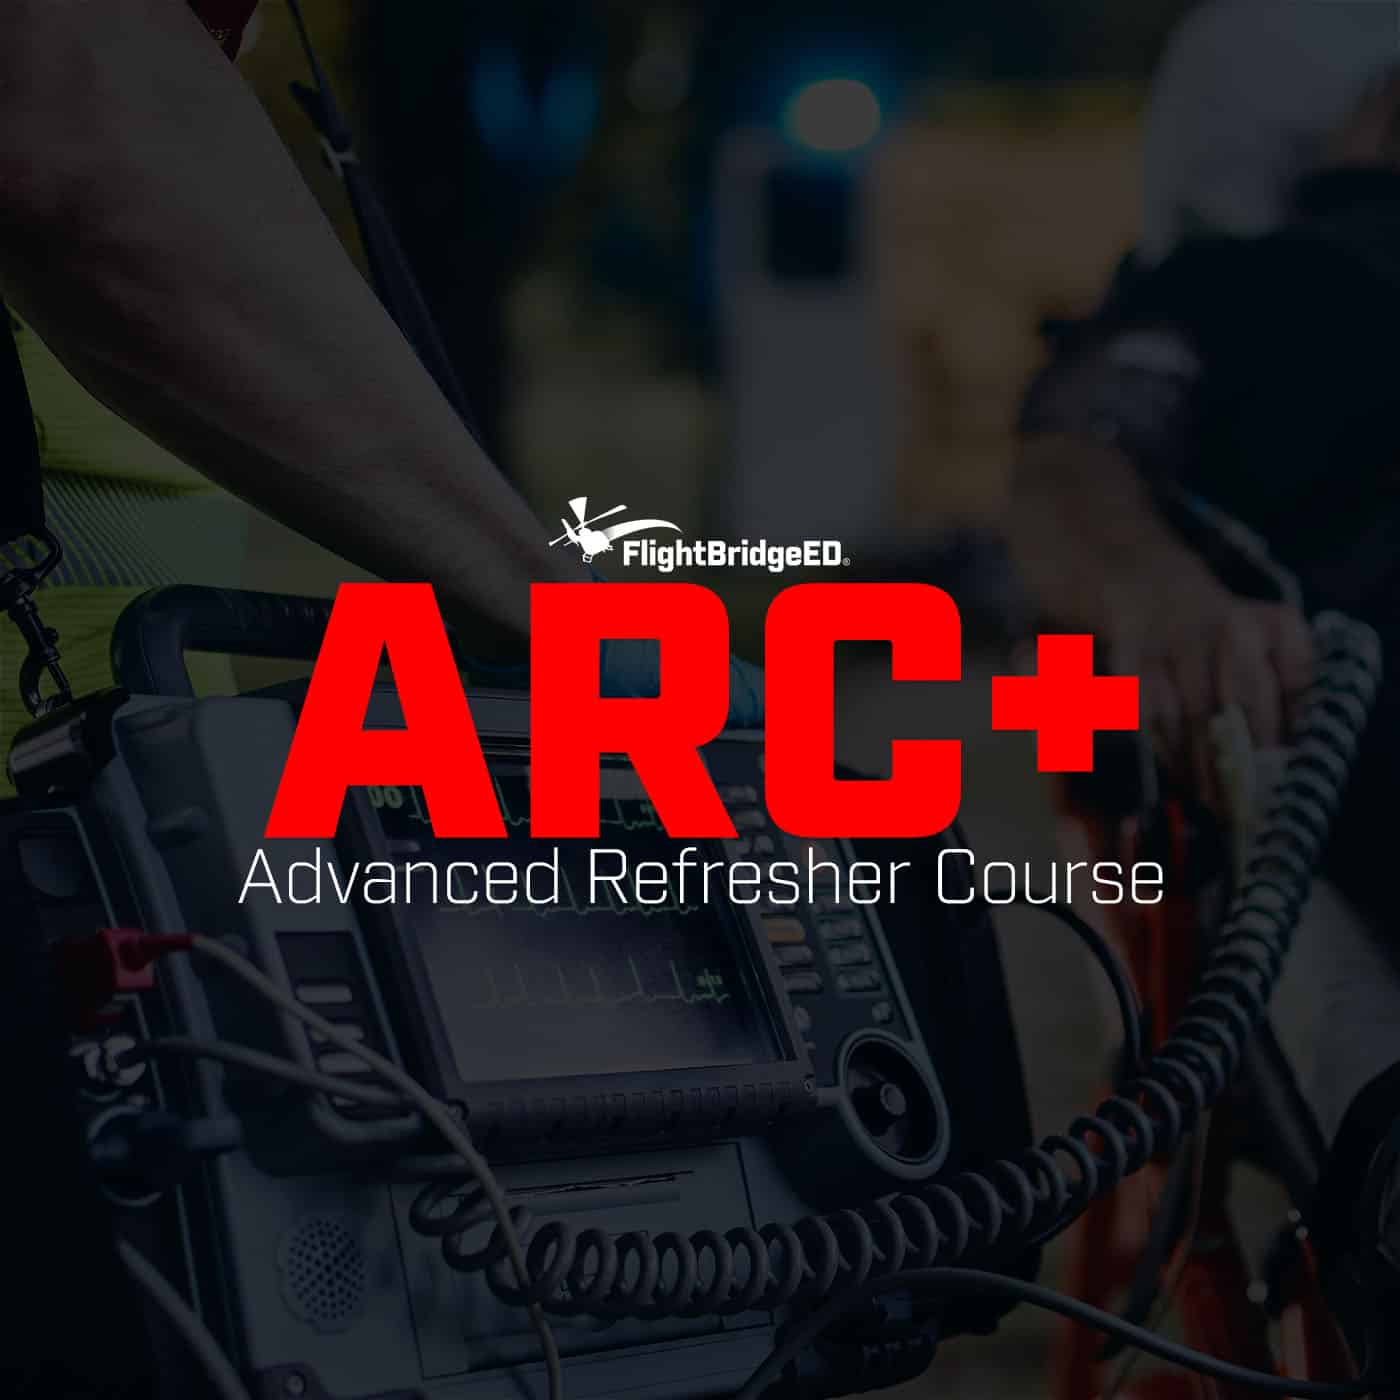 FlightBridgeED ARC+ Advanced Refresher Course for Paramedic continuing education, EMT continuing education, or Nurse / RN continuign education